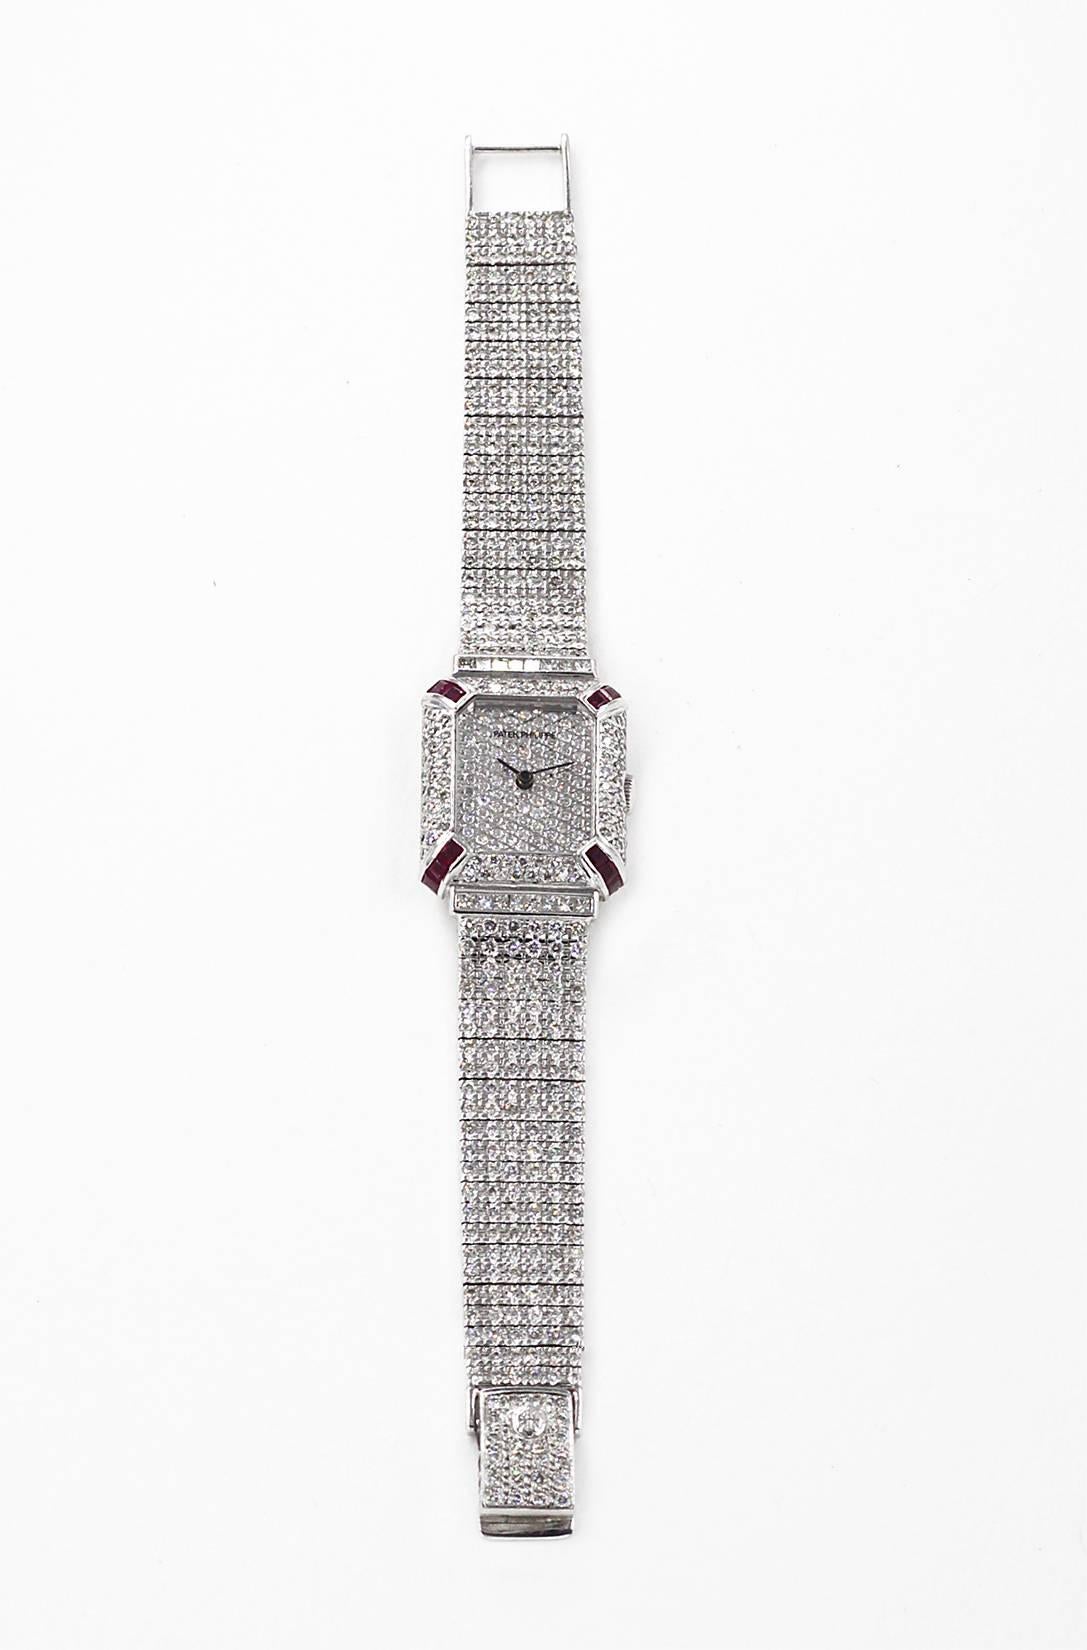 18K Ladies' Patek Philippe features 20 cts Diamonds & 1 cts Rubies. This watch is a luxurious and elegant timepiece that can be worn to the office or casually. Its durable bracelet is made of 18k white gold and diamonds and features a folding